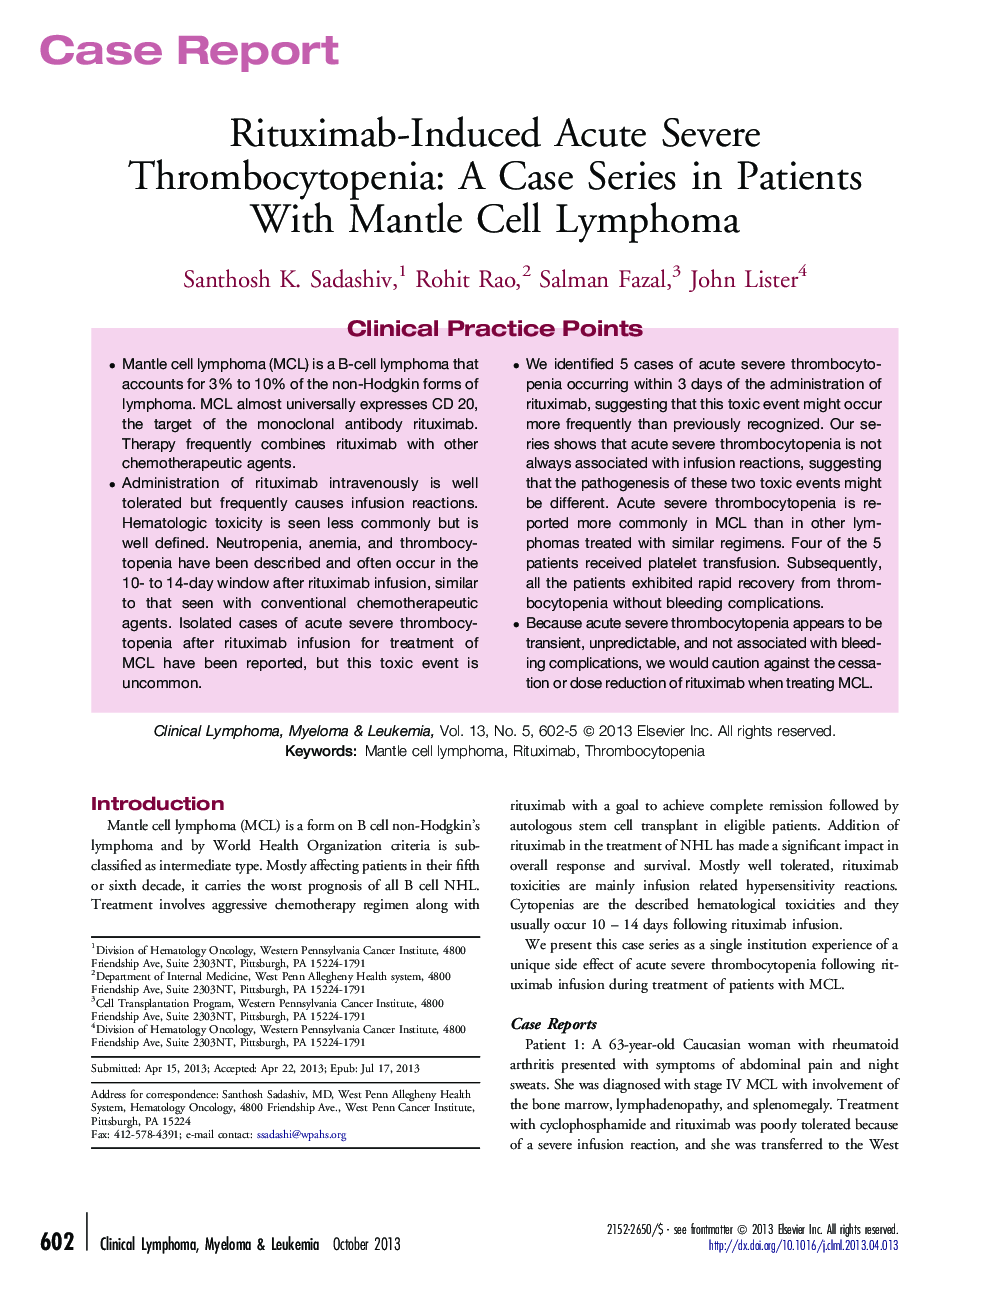 Rituximab-Induced Acute Severe Thrombocytopenia: A Case Series in Patients With Mantle Cell Lymphoma